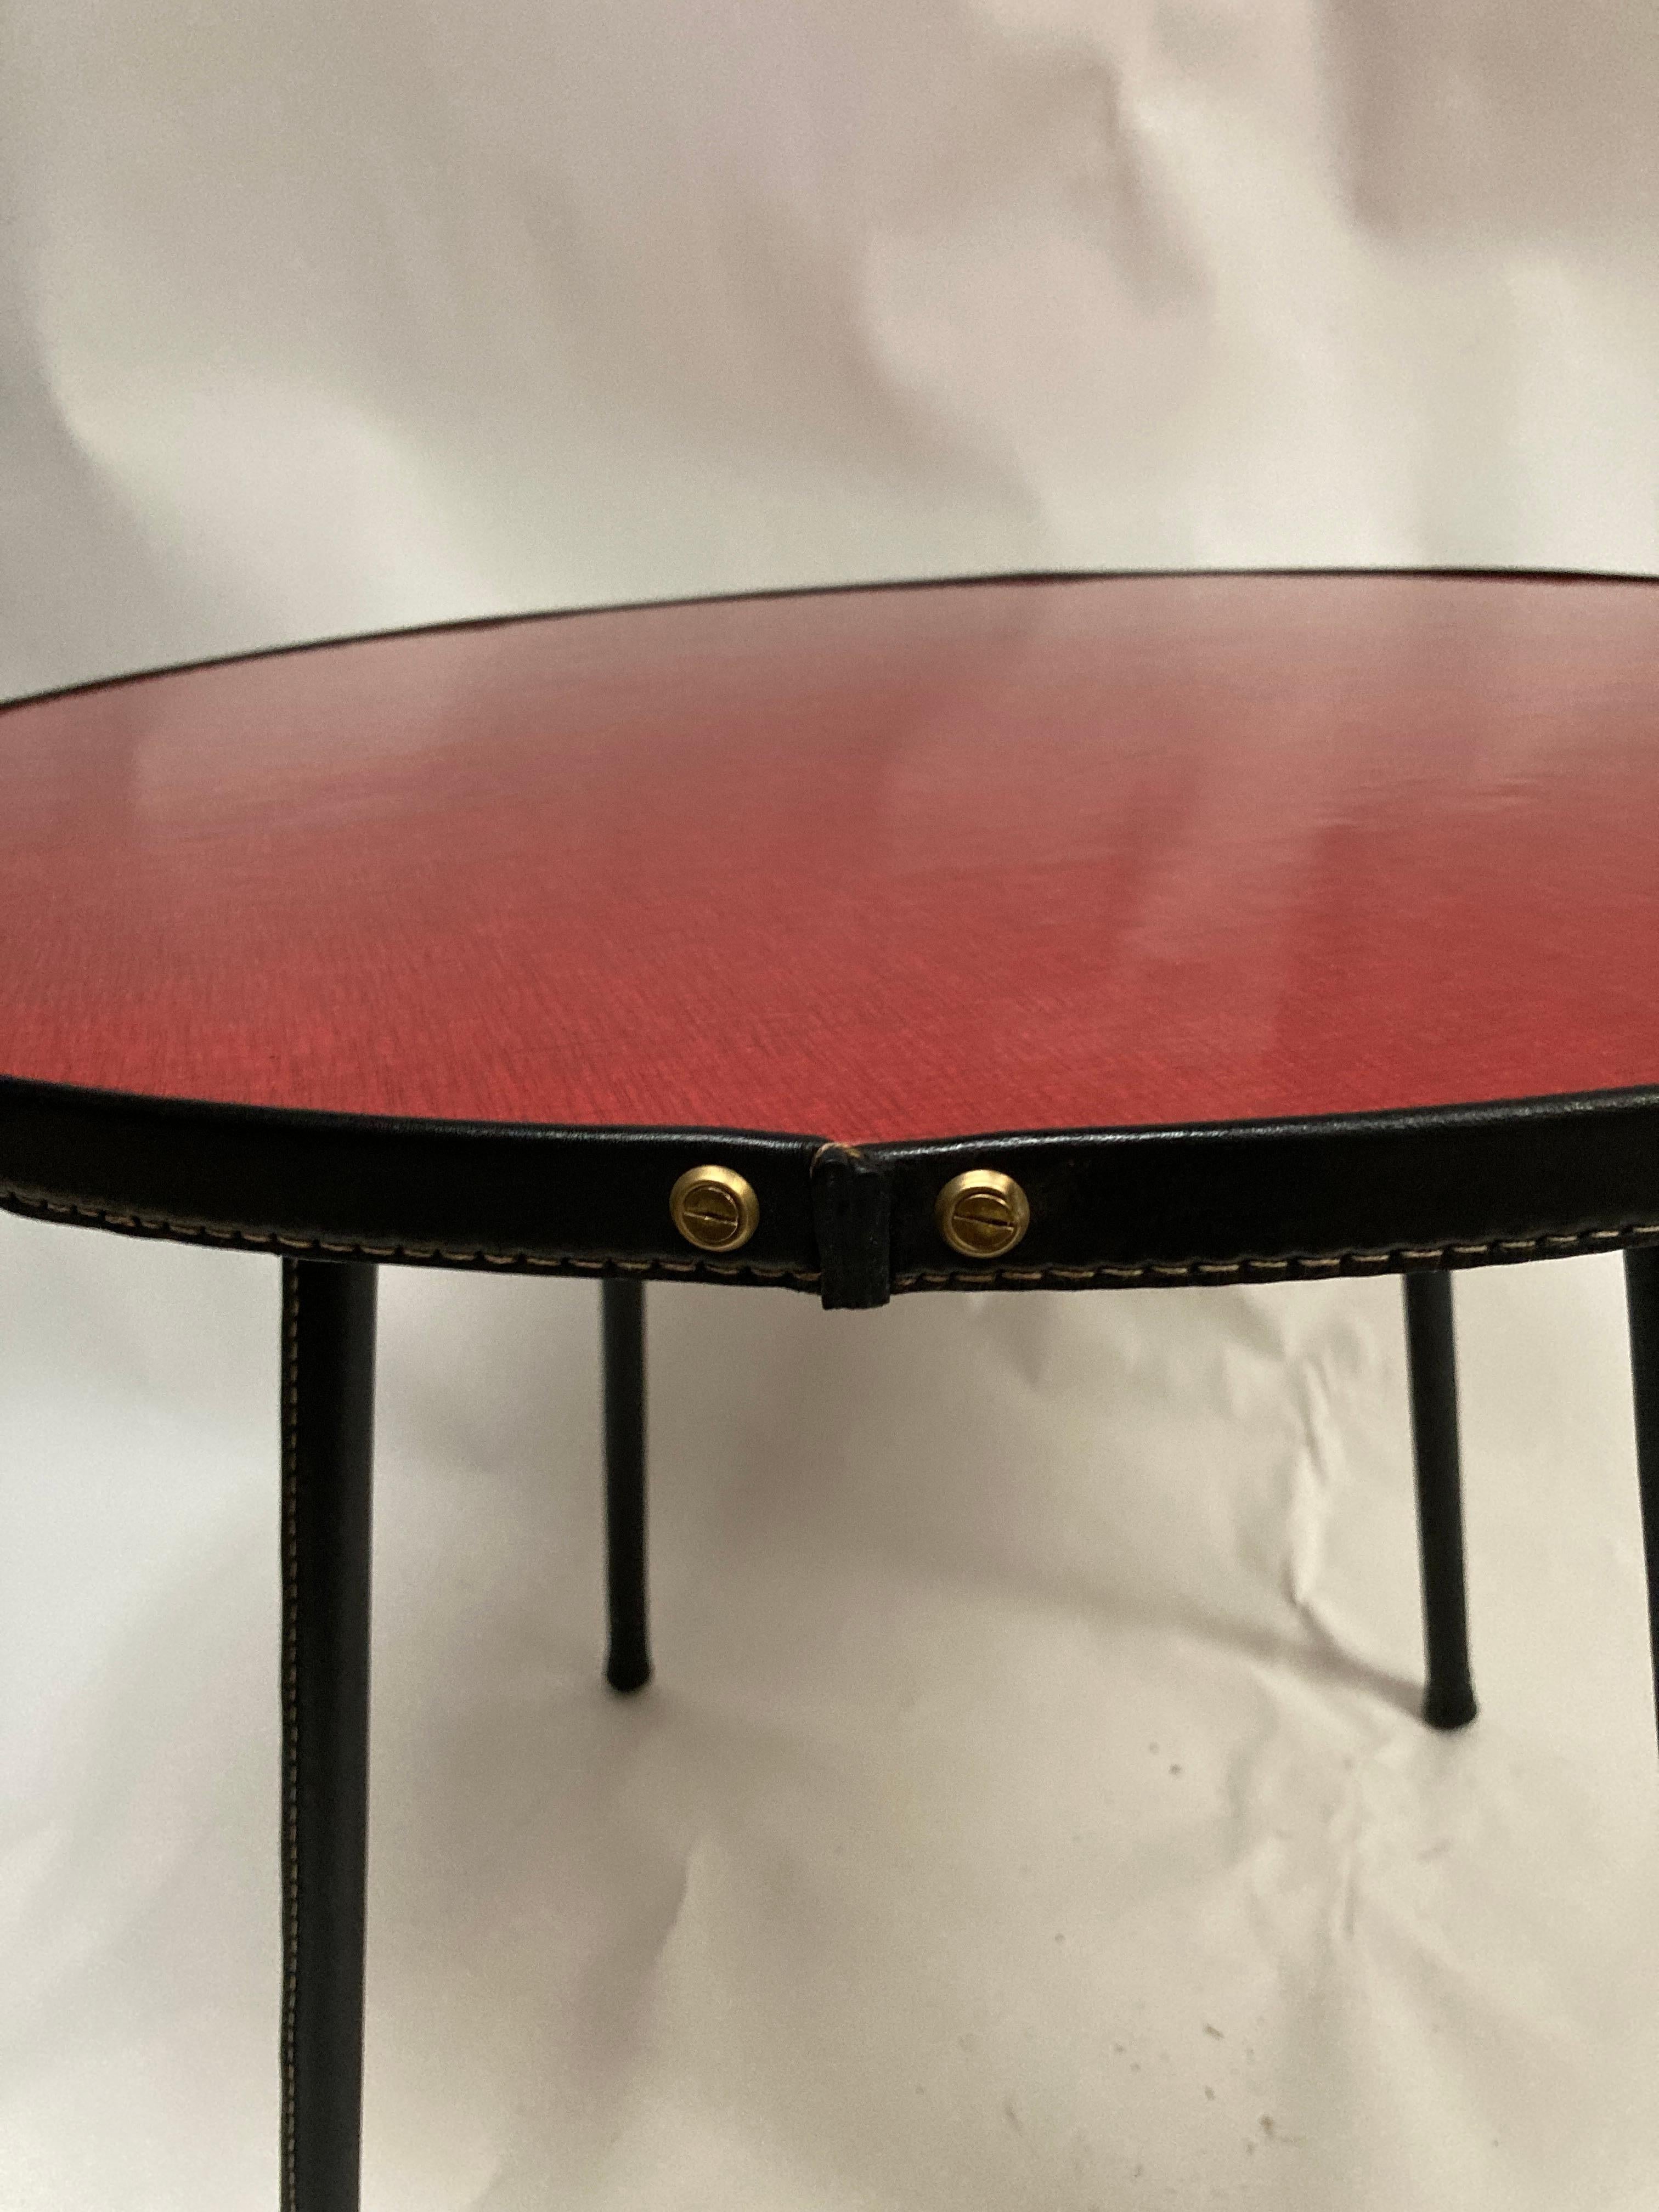 Very nice stitched leather table with red formica top
Black leather feet 
BY Jacques Adnet
France
